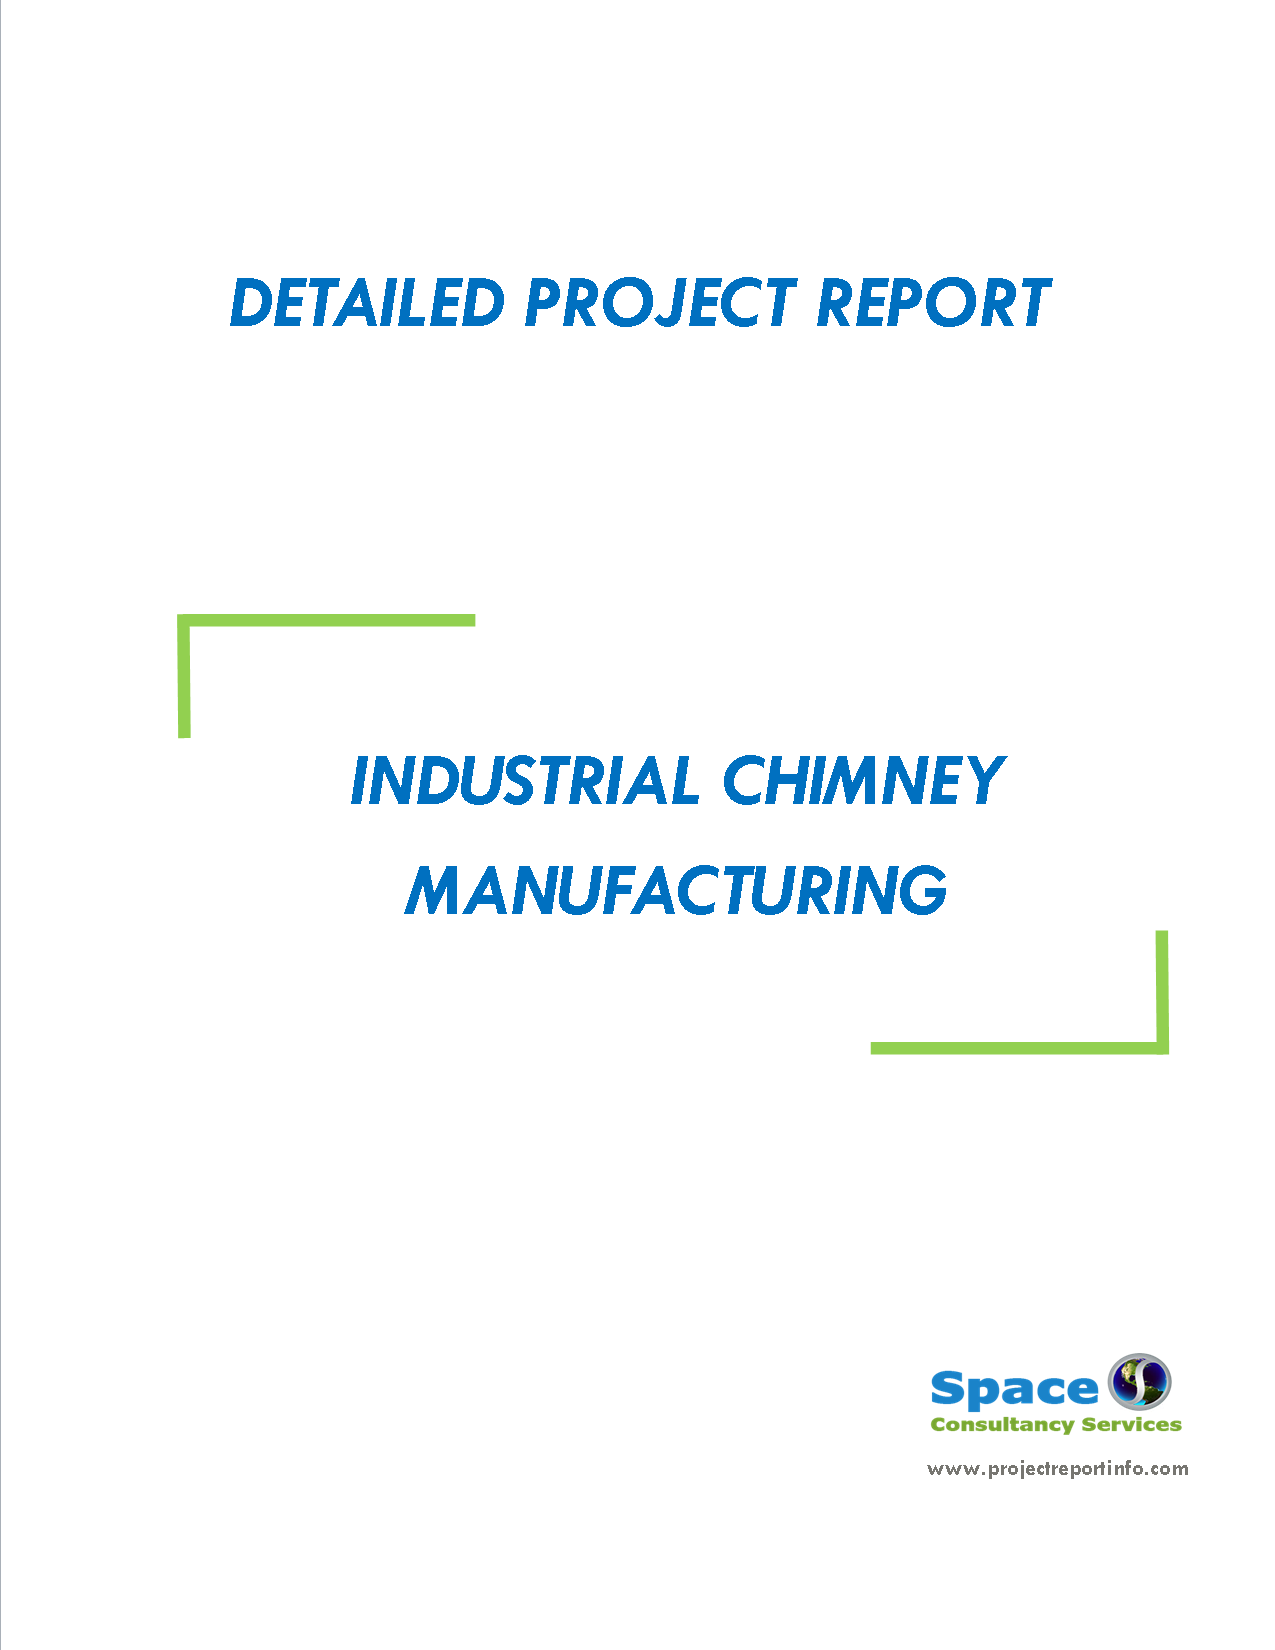 Project Report on Industrial Chimney Manufacturing